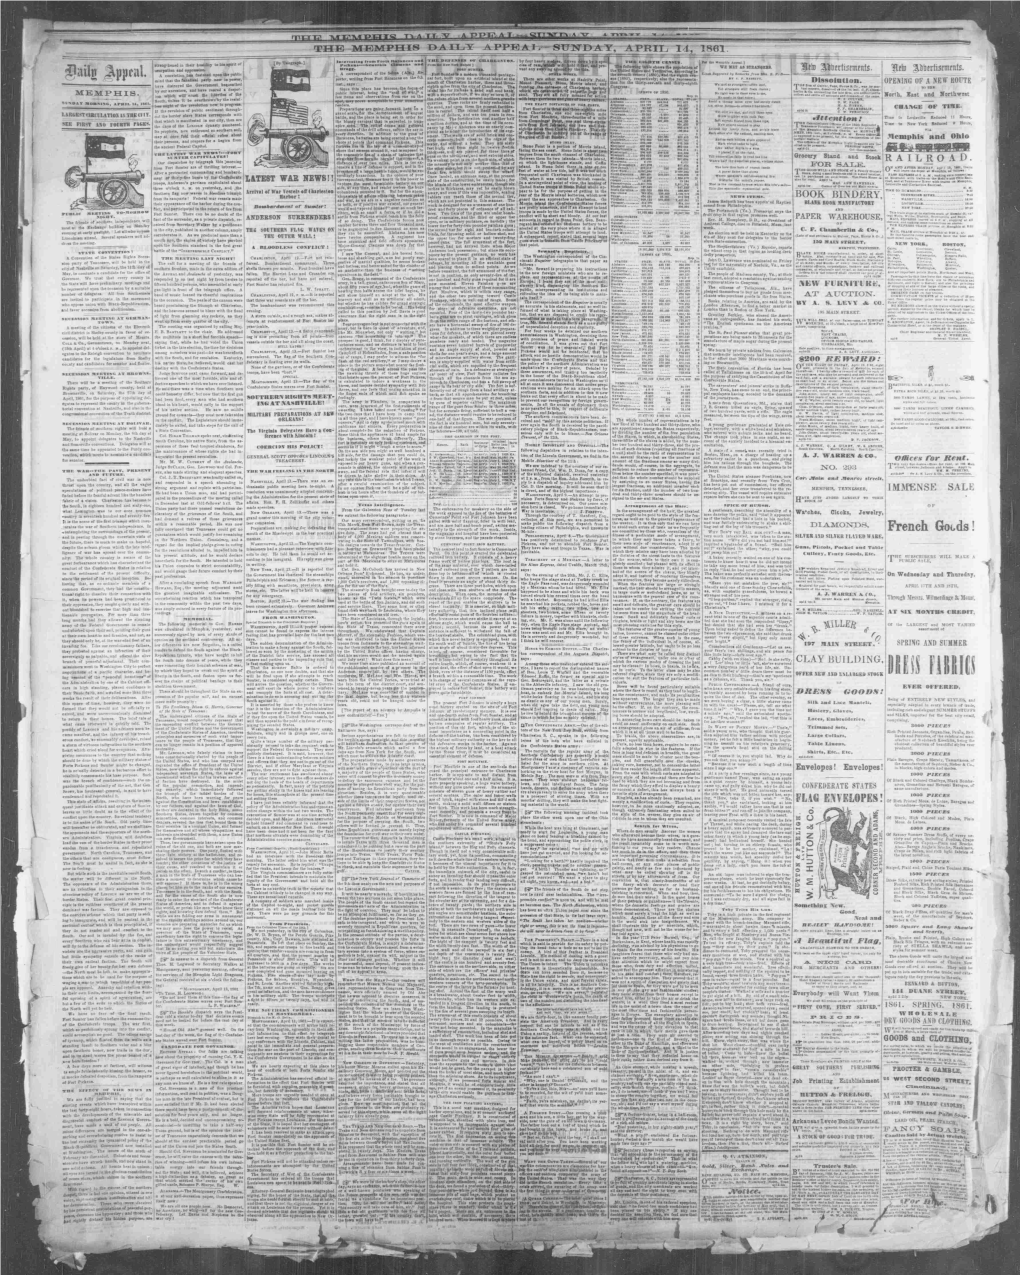 The Memphisdaily Appeal Sunday, April 14, 1861 Railroad